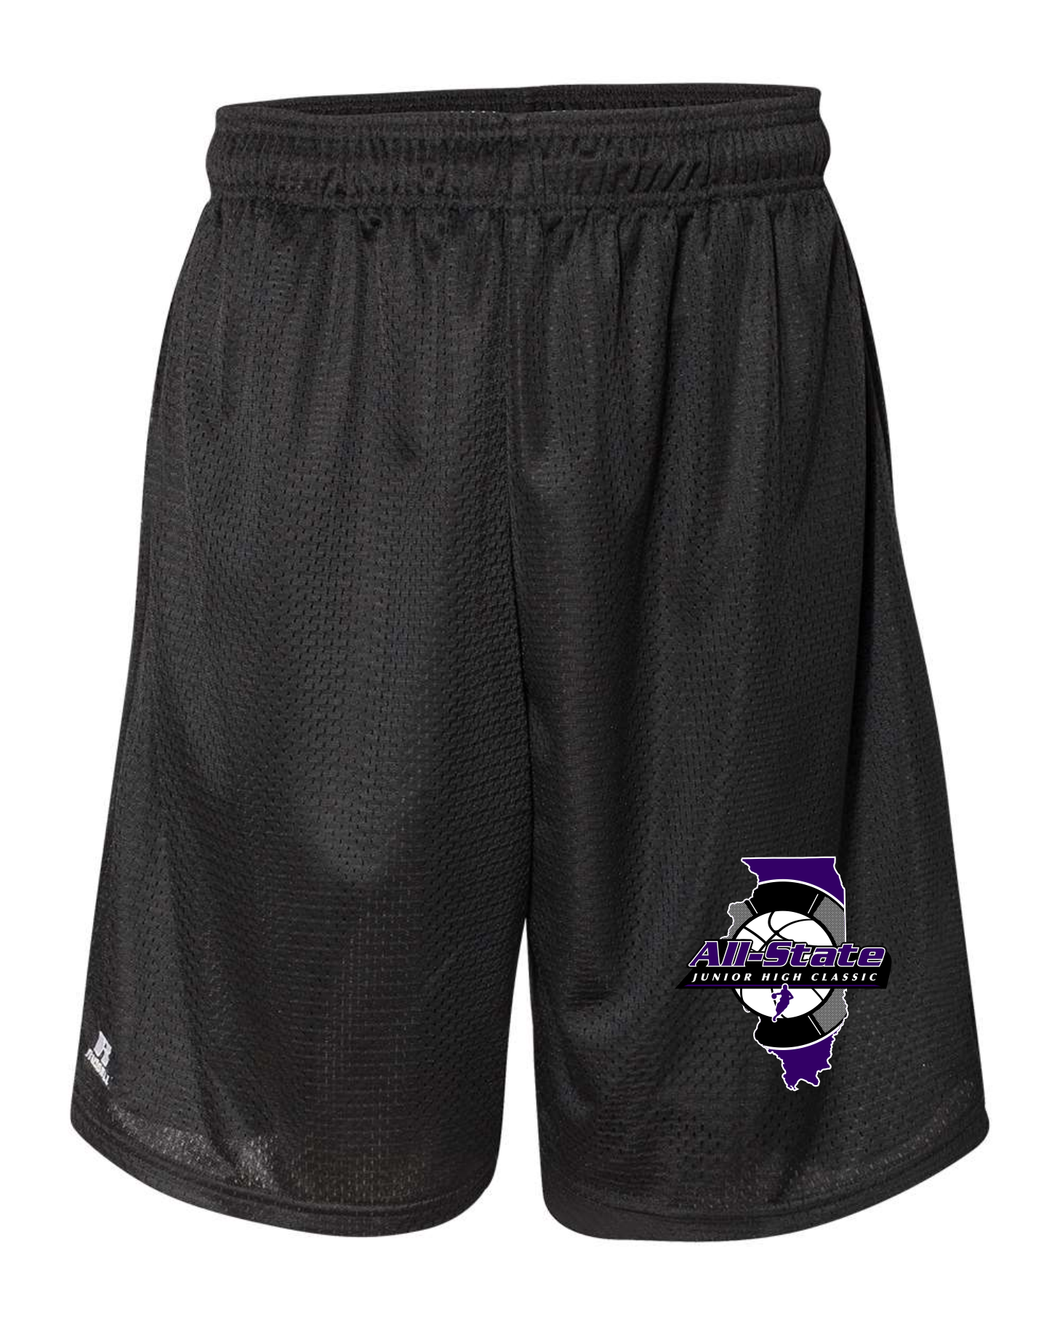 All-State Junior High Classic Mesh Shorts